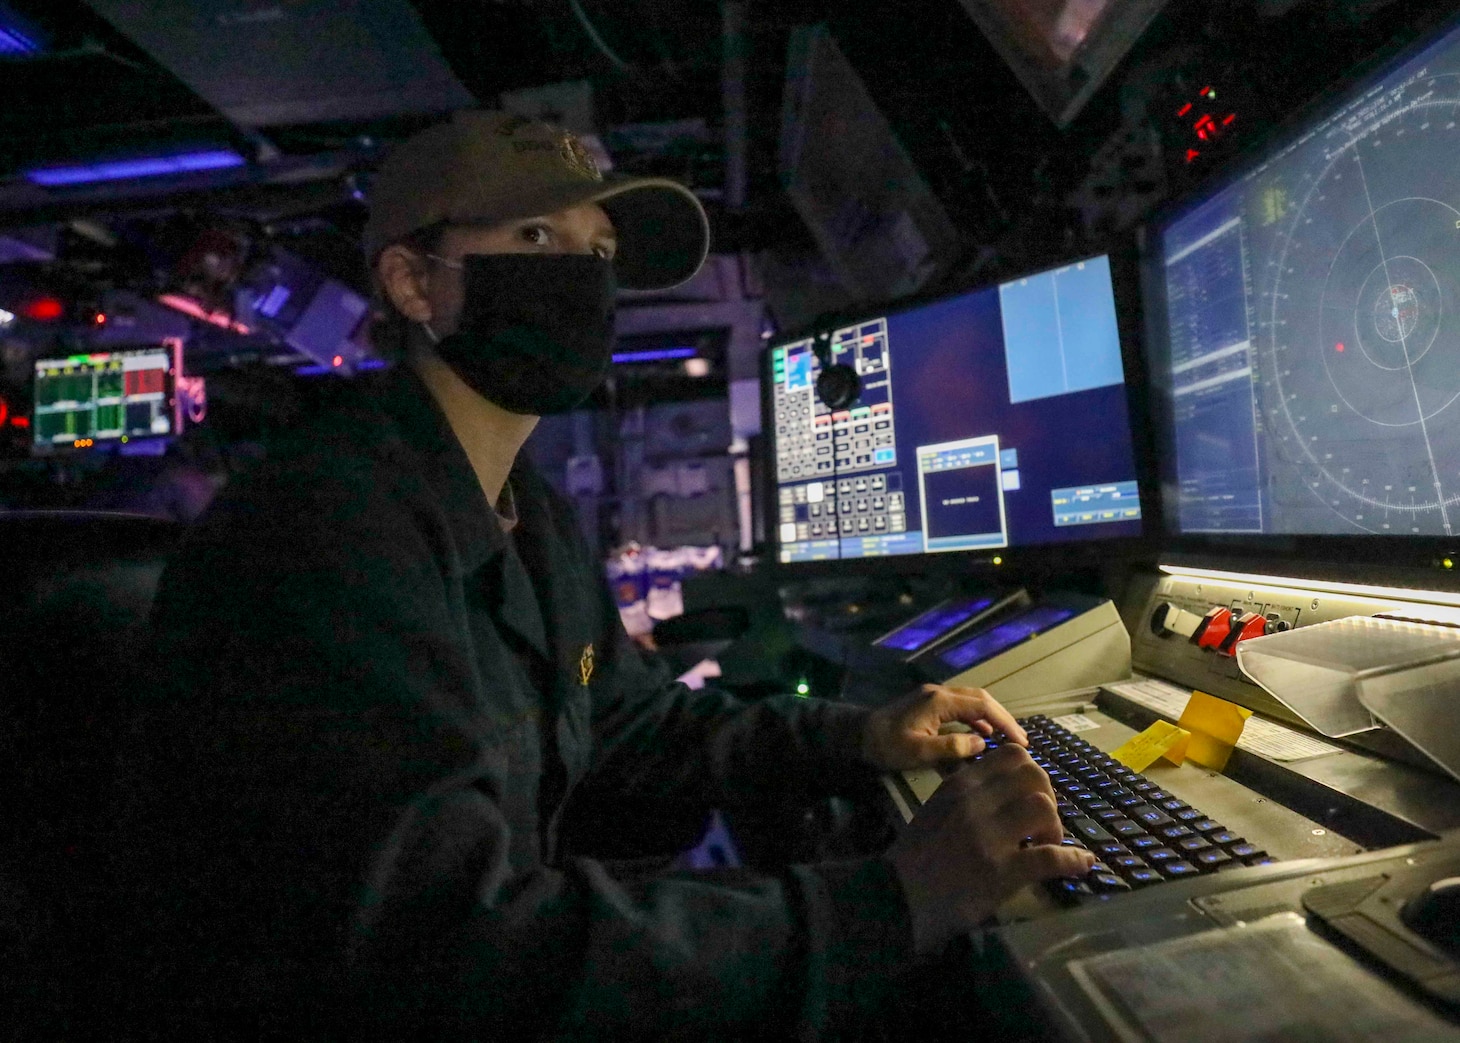 Ensign Kellen E. Peddicord, from Santa Barbara, Calif., monitors surface contacts from the combat information center as Arleigh Burke-class guided-missile destroyer USS Benfold (DDG 65) conducts routine underway operations. Benfold is forward-deployed to the U.S. 7th Fleet area of operations in support of a free and open Indo-Pacific.